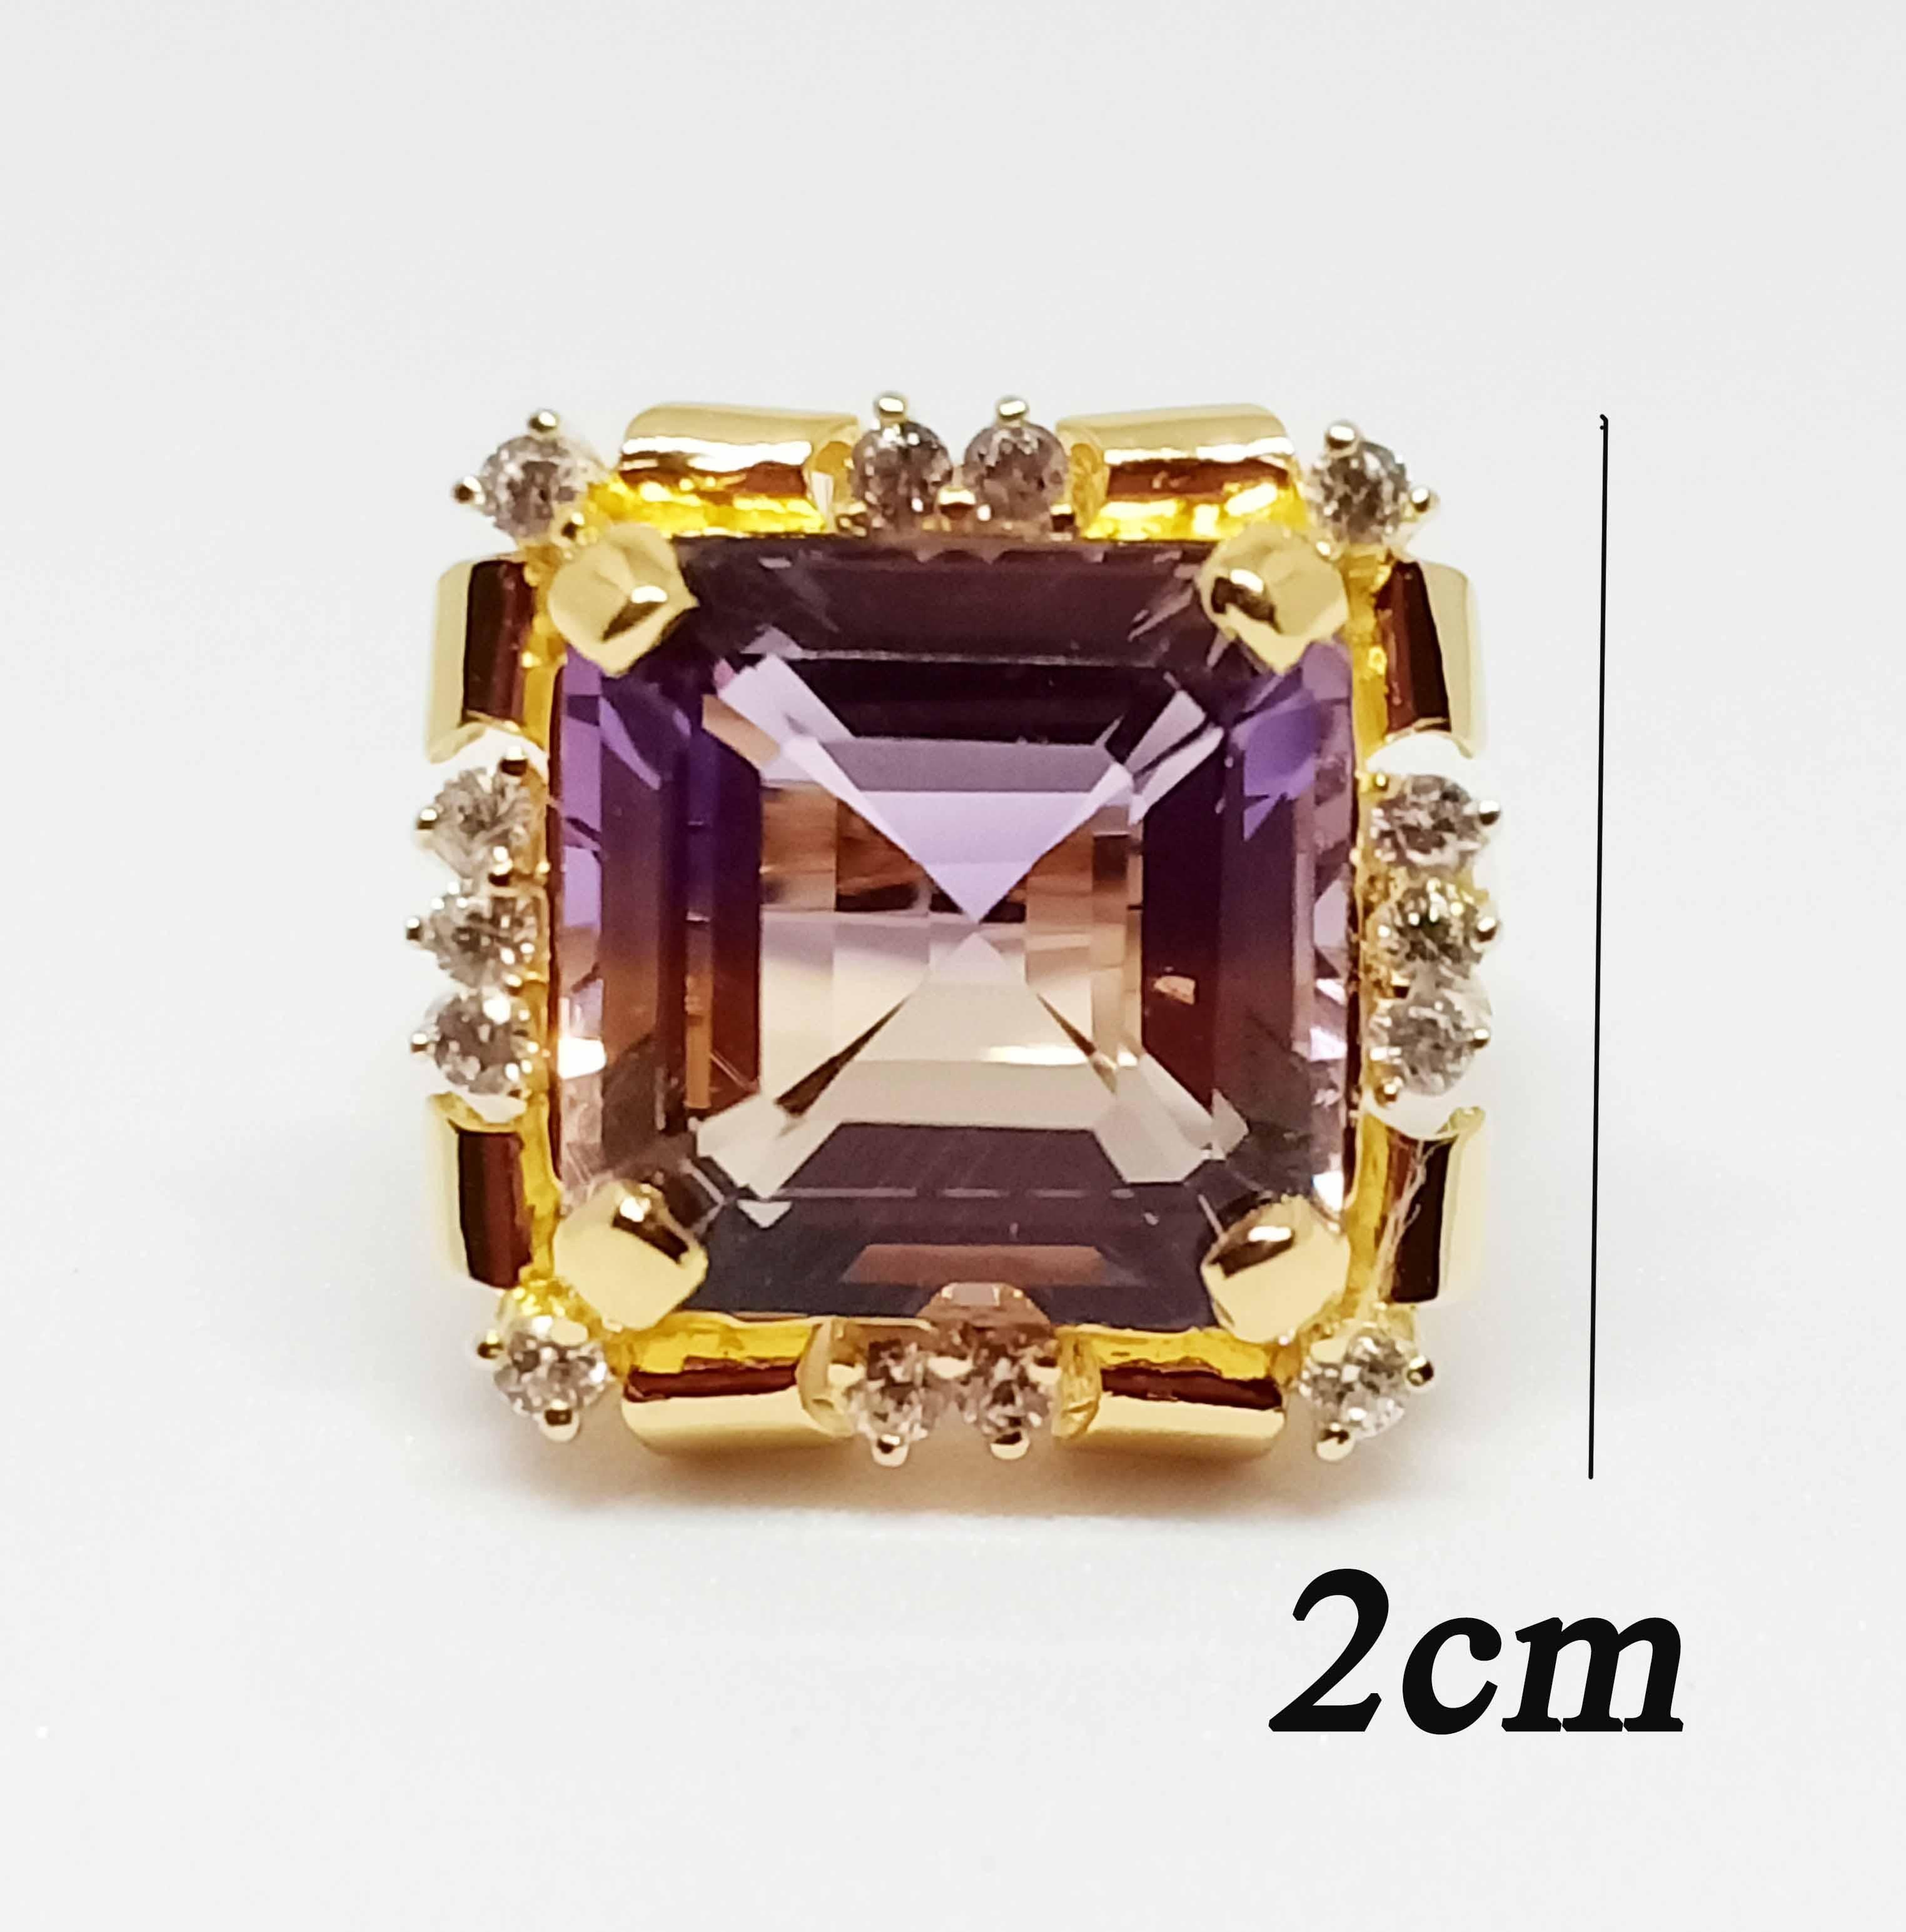 Ametrine Octagon 14.5x14.5mm ( 12.79 cts )
White zircon round. 2 mm. 14 pcs.
Sterling silver on 18K gold Plated
Size 7 us.
(Can be resizable in lower size not upper size )

Search (seller storefront) ornamento jewellery

Ametrine history and